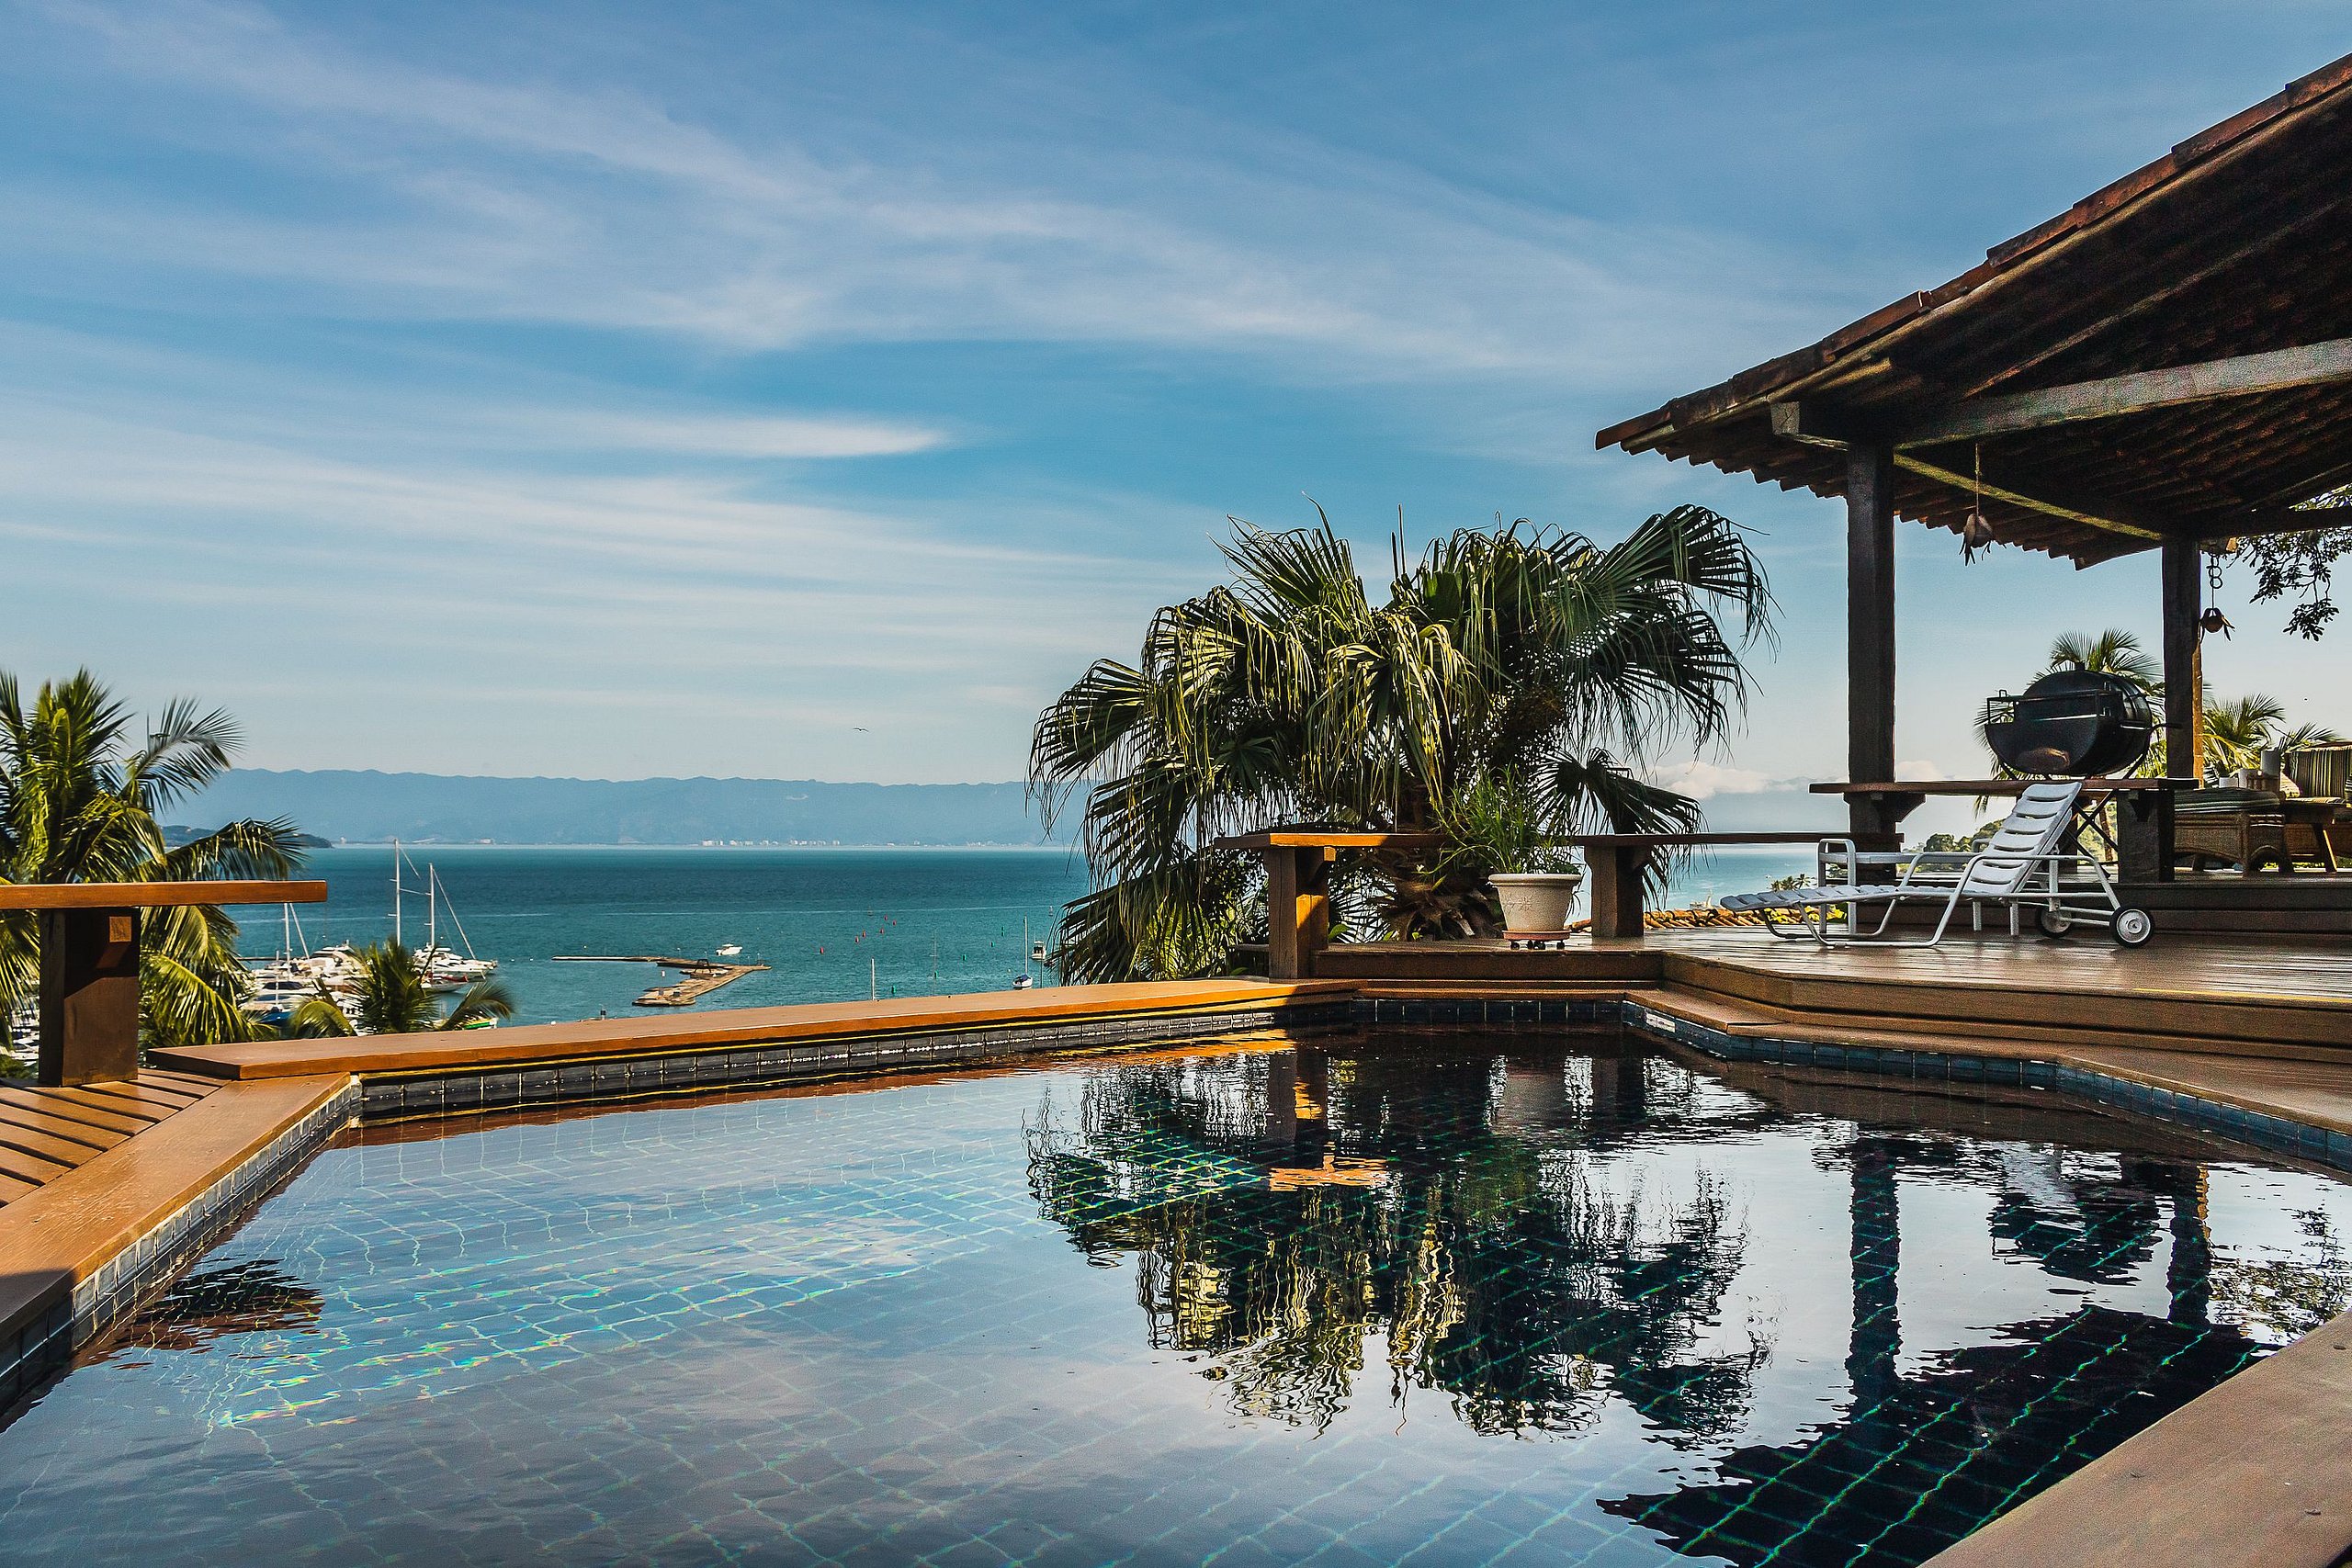 Property Image 2 - Casa Deck ao Mar - House with infinity pool overlooking the channel of Ilhabela